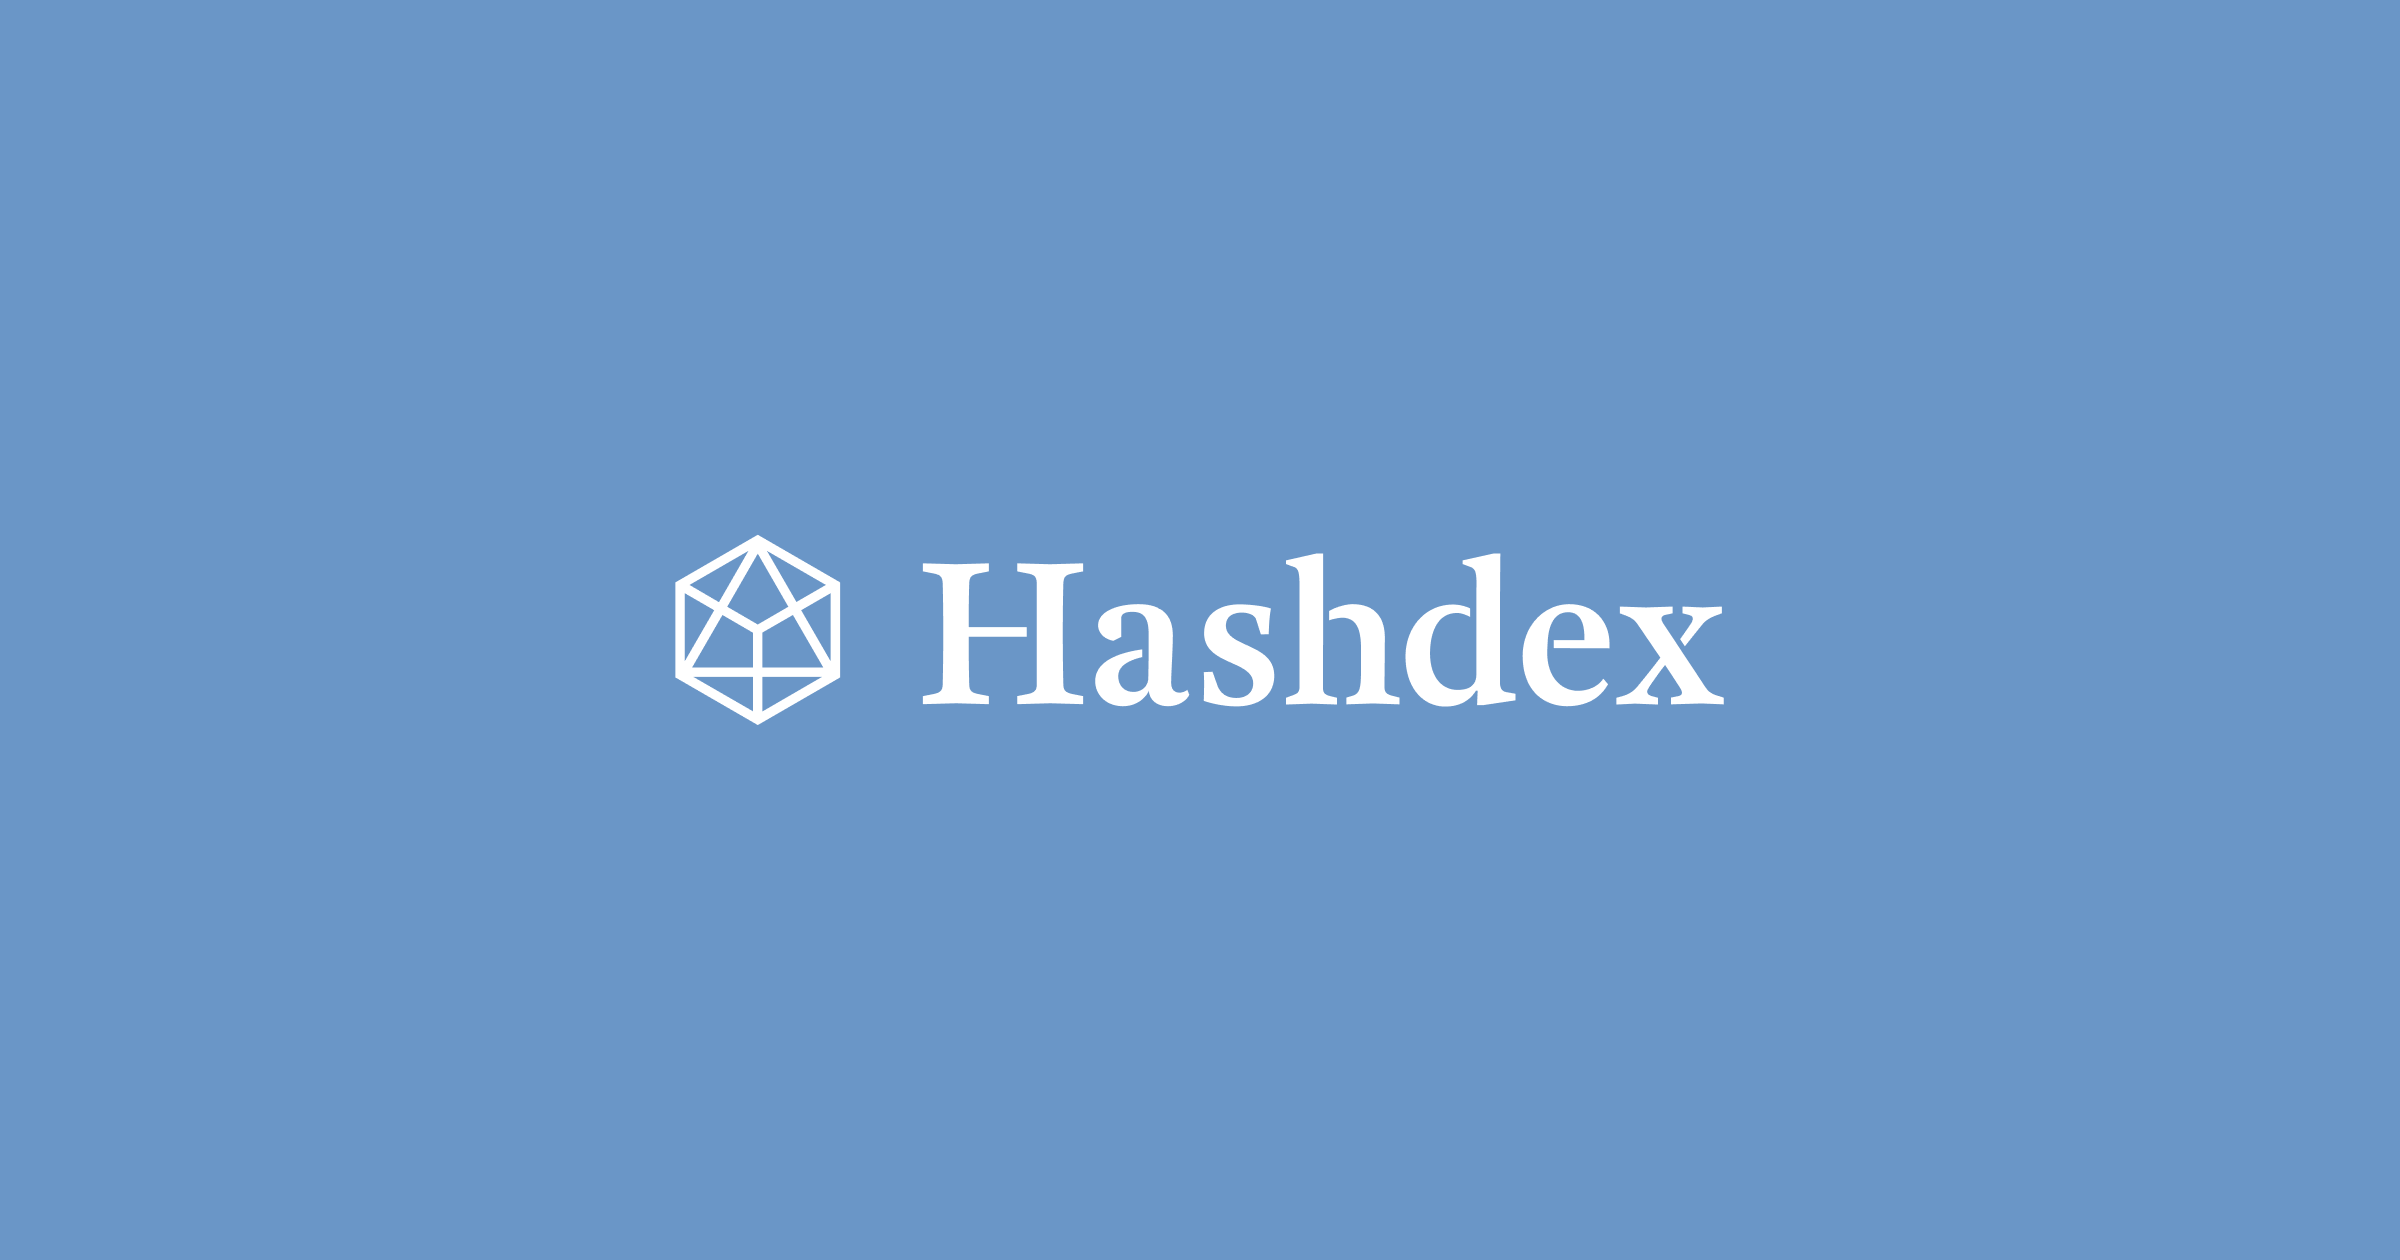 Hashdex to launch world's first pure-play Web 3.0 ETF, WEB311, powered by CF Web 3.0 Smart Contract Platforms Index